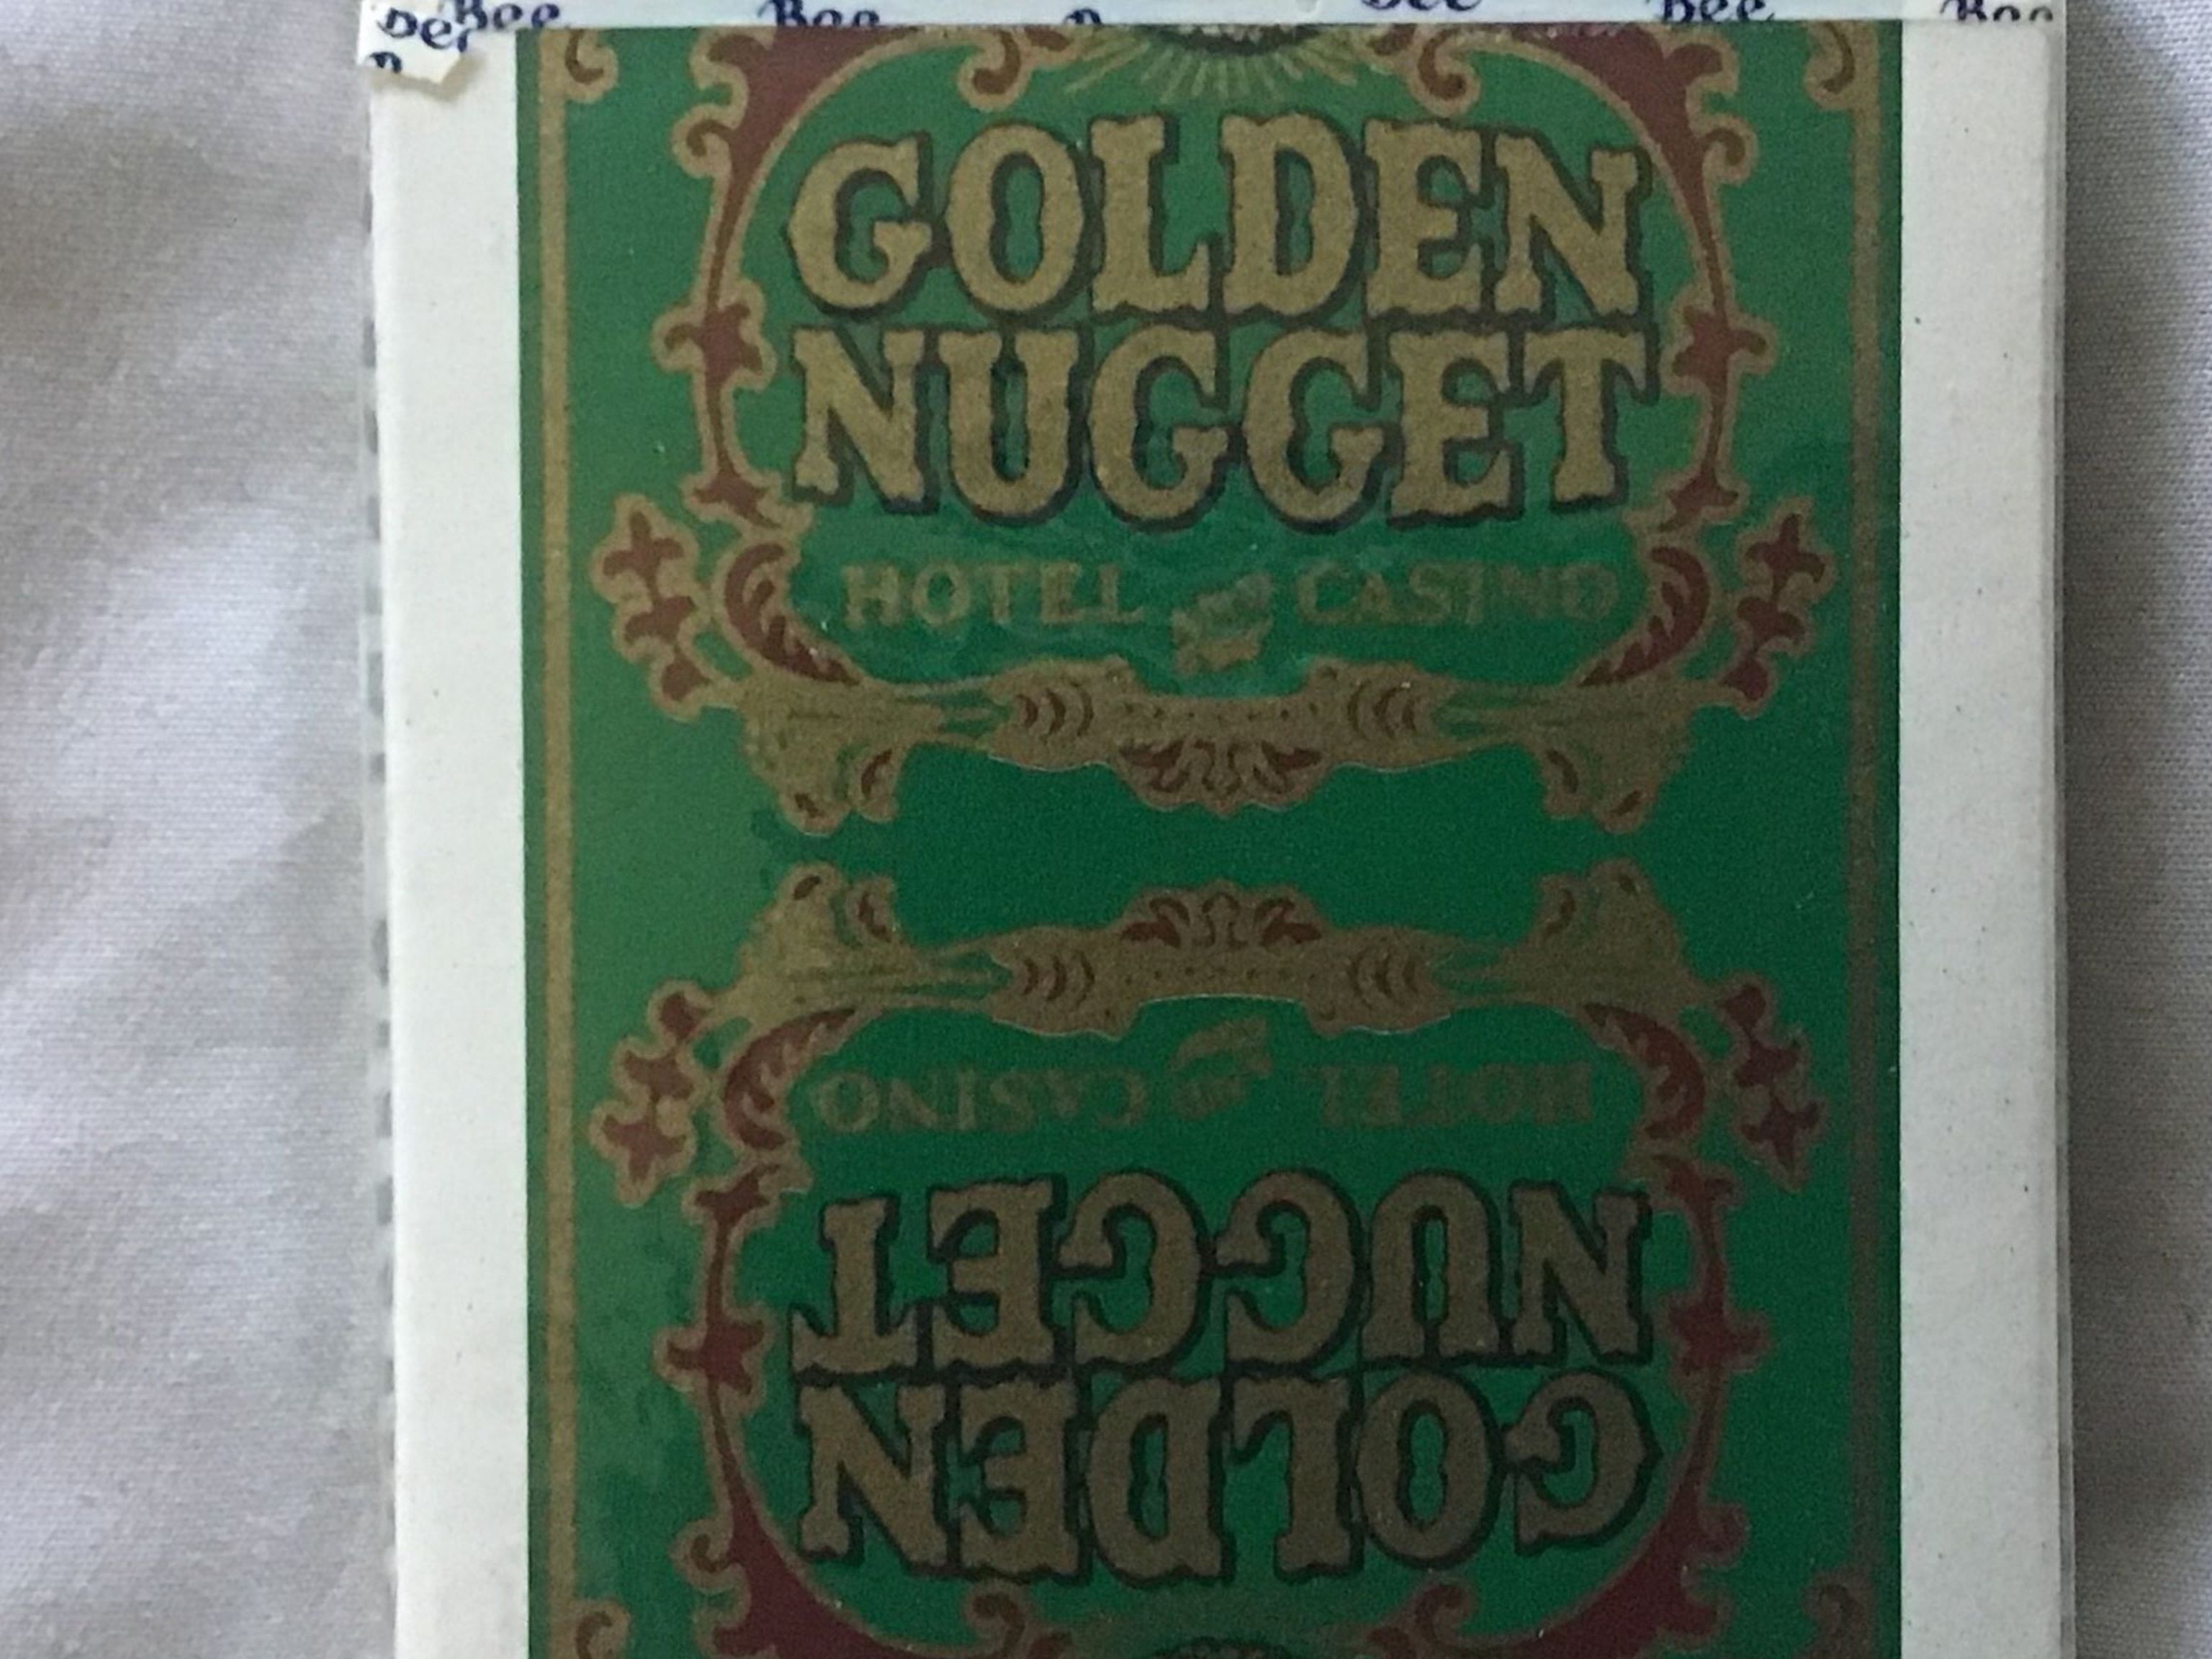 A Vintage Deck Of Golden Nugget Playing Cards Still Sealed (MIB)